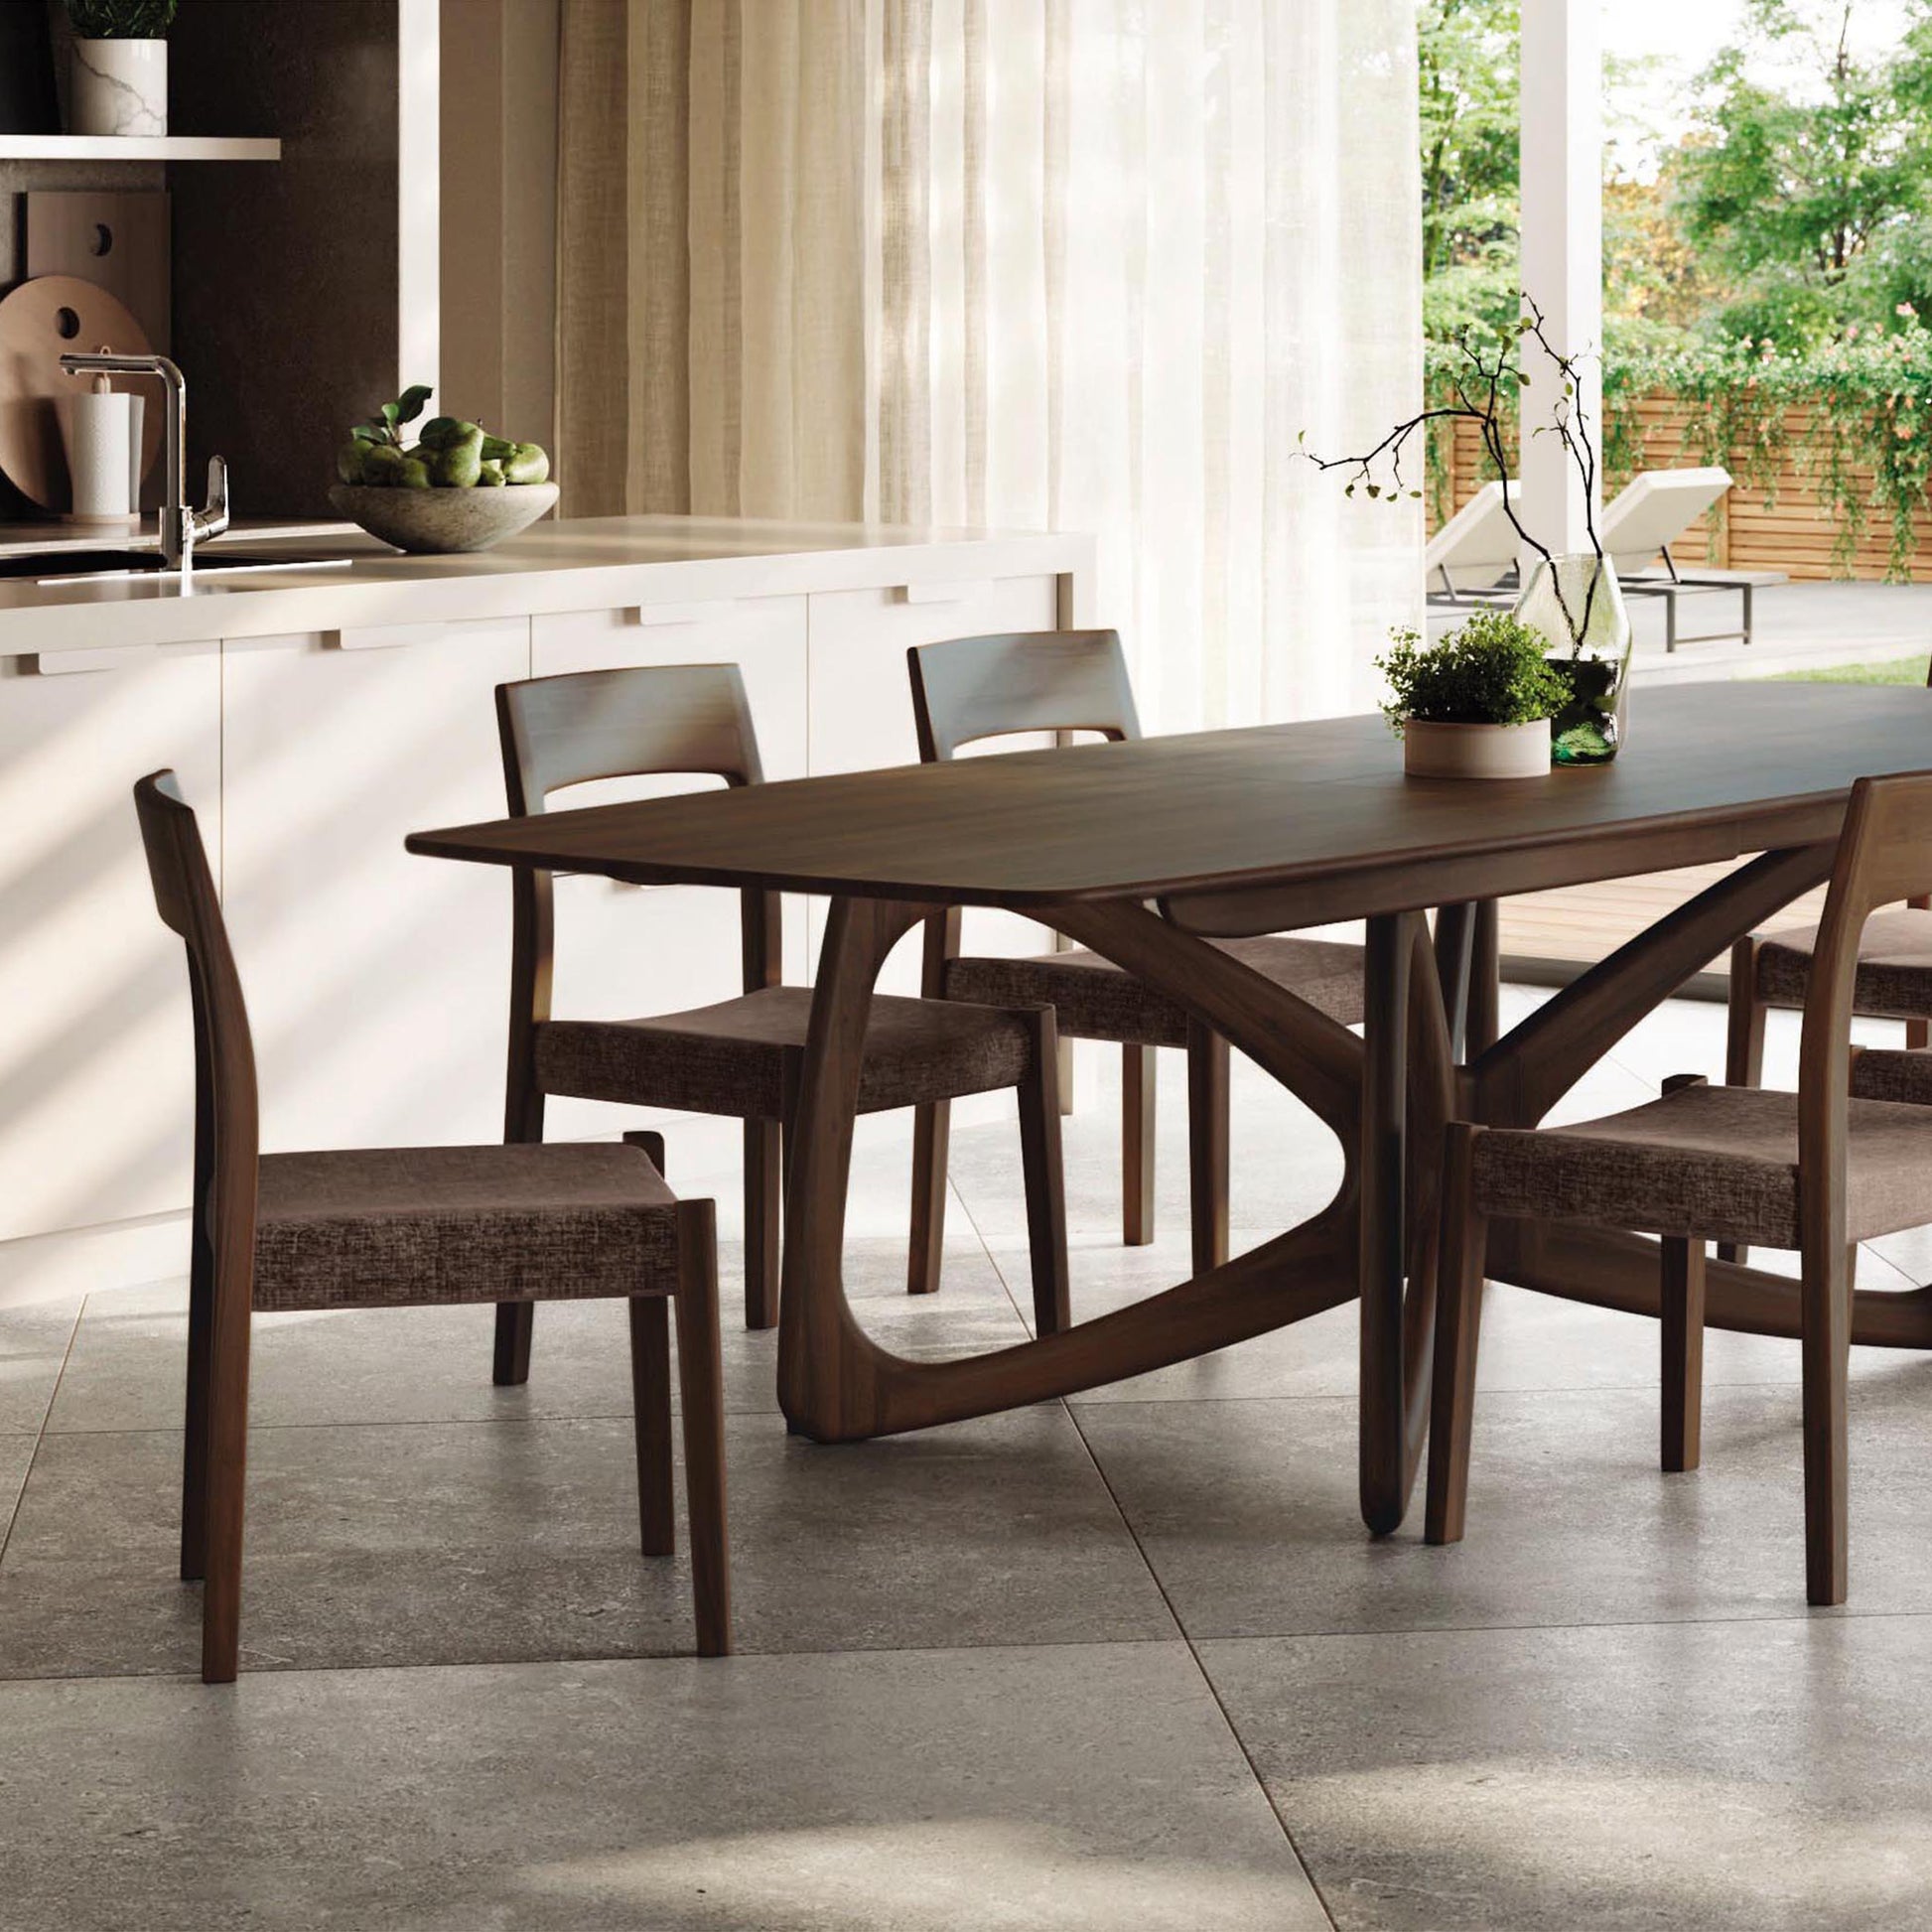 Alt text: A modern dining room with a sustainably sourced hardwood Butterfly Extension Dining Table by Copeland Furniture, accompanied by six cushioned chairs. The table's artistic base holds a small potted plant centerpiece. Large windows with sheer curtains allow natural light to flood the solid wood furniture setting.